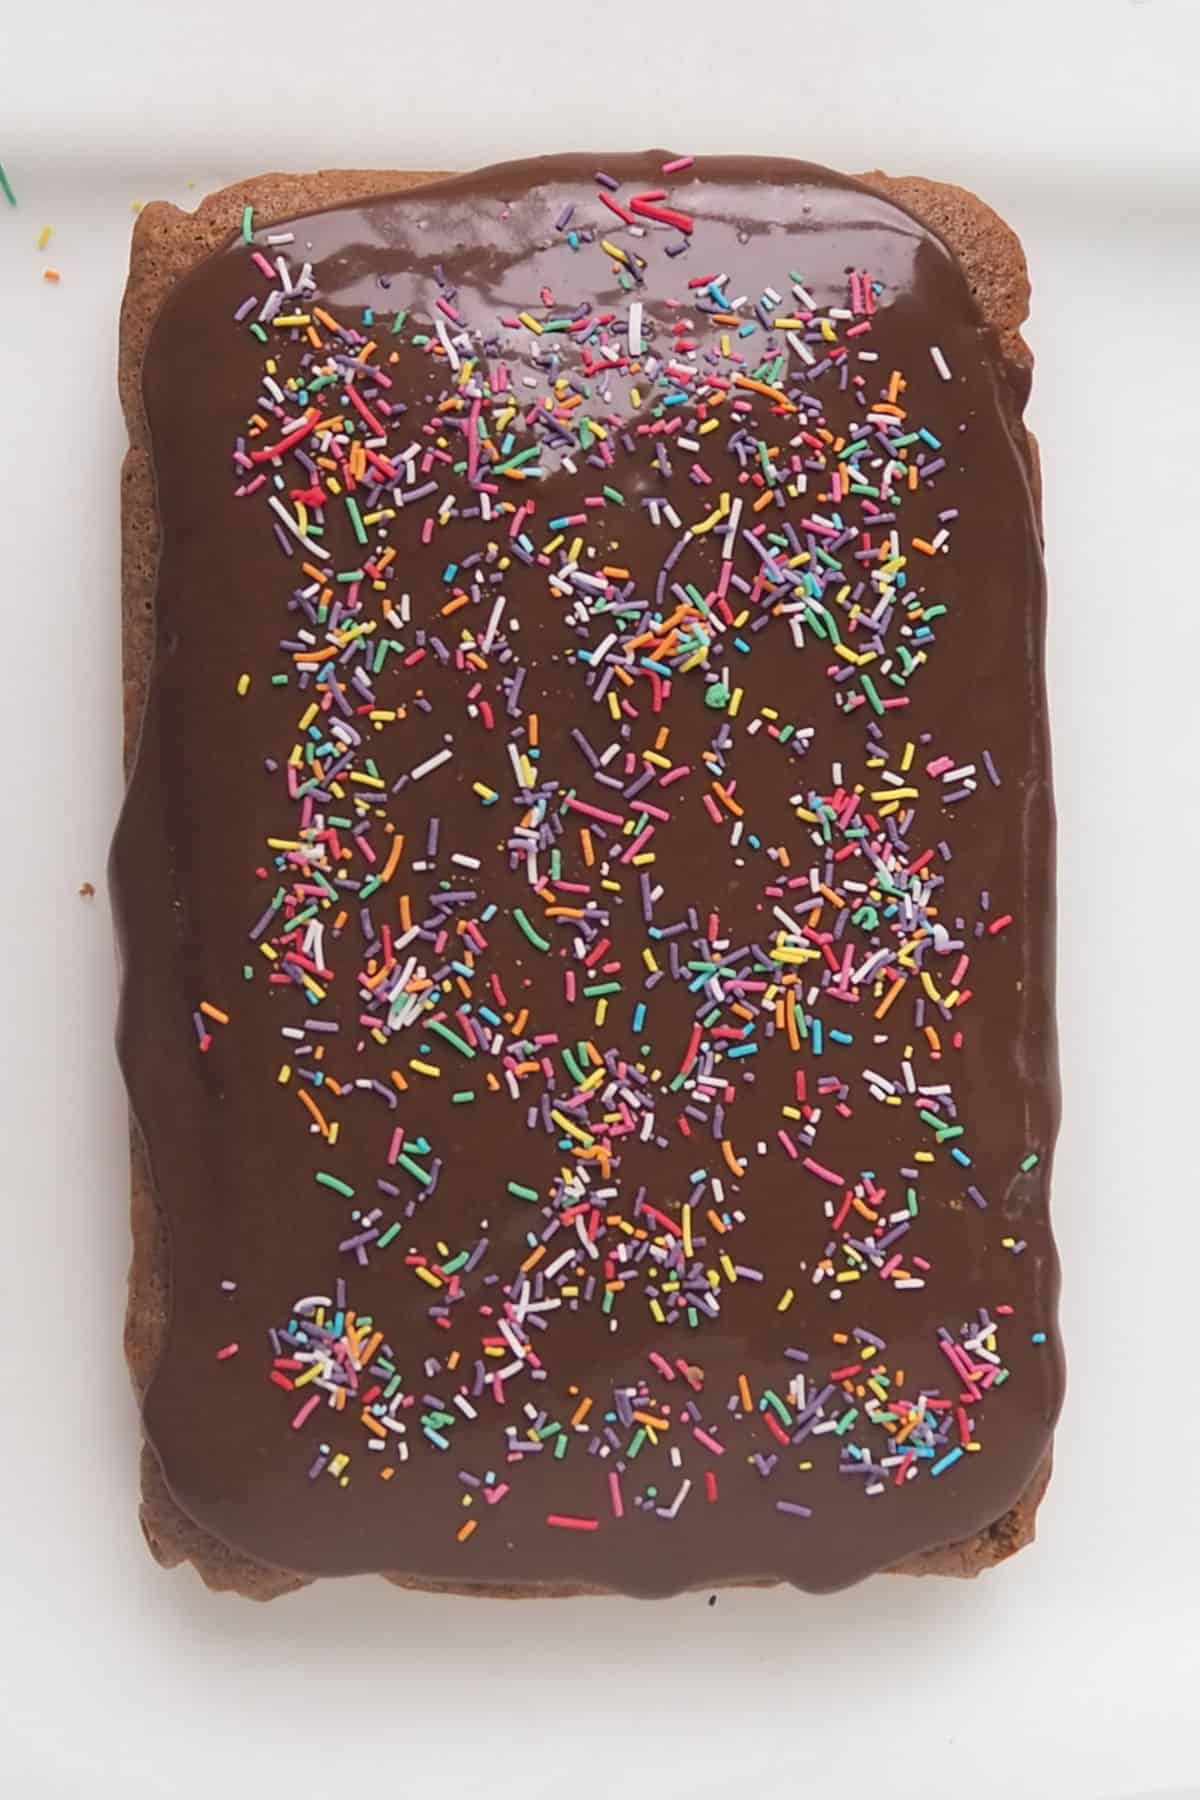 Uncut Chocolate Cake iced and decorated with sprinkles.